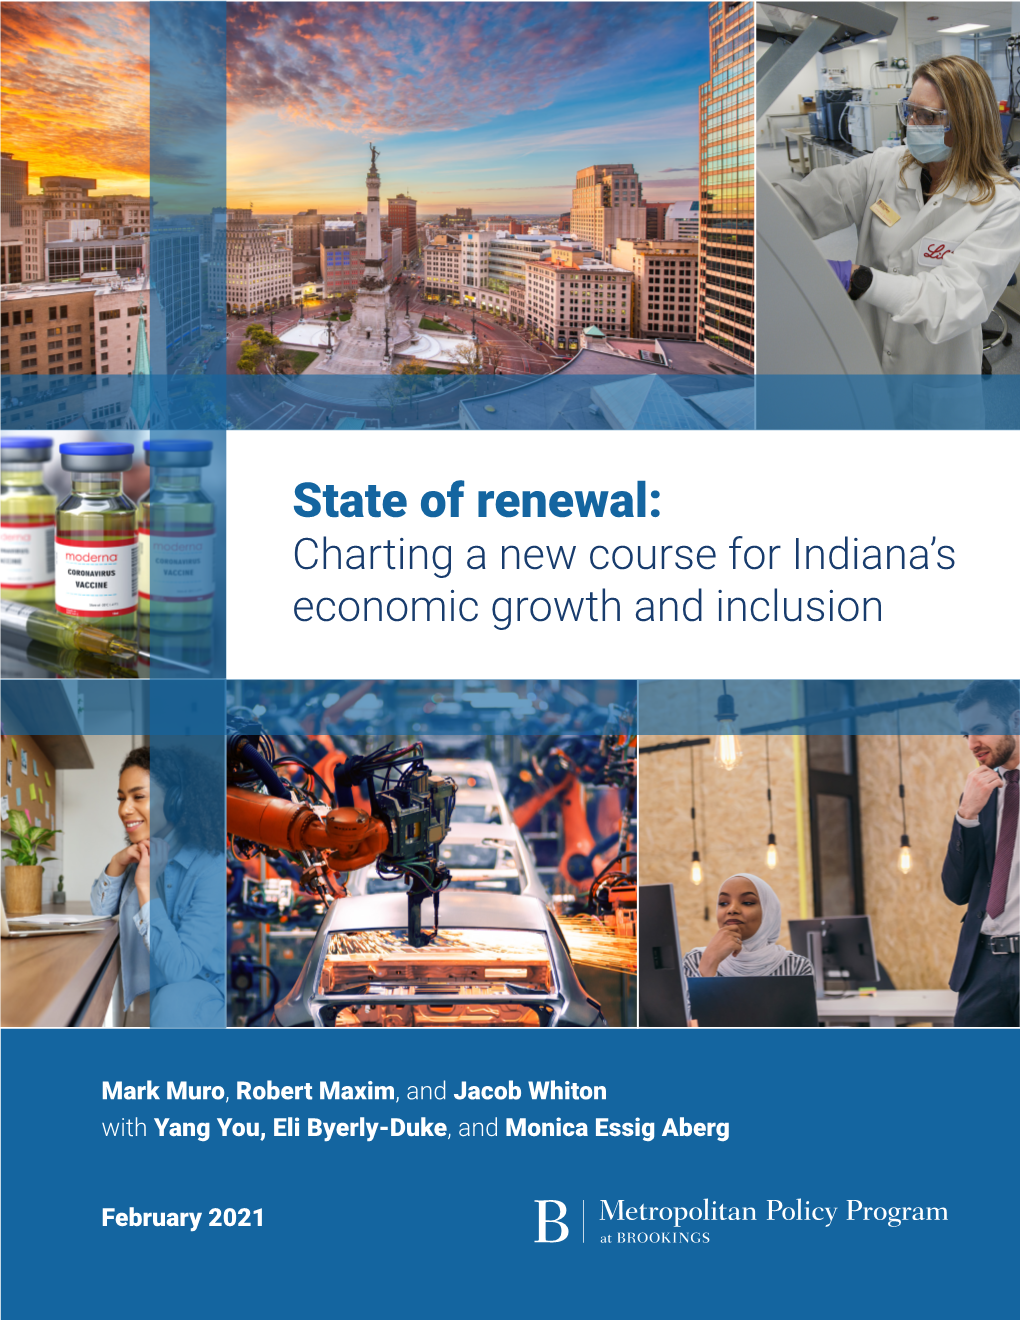 State of Renewal: Charting a New Course for Indiana's Economic